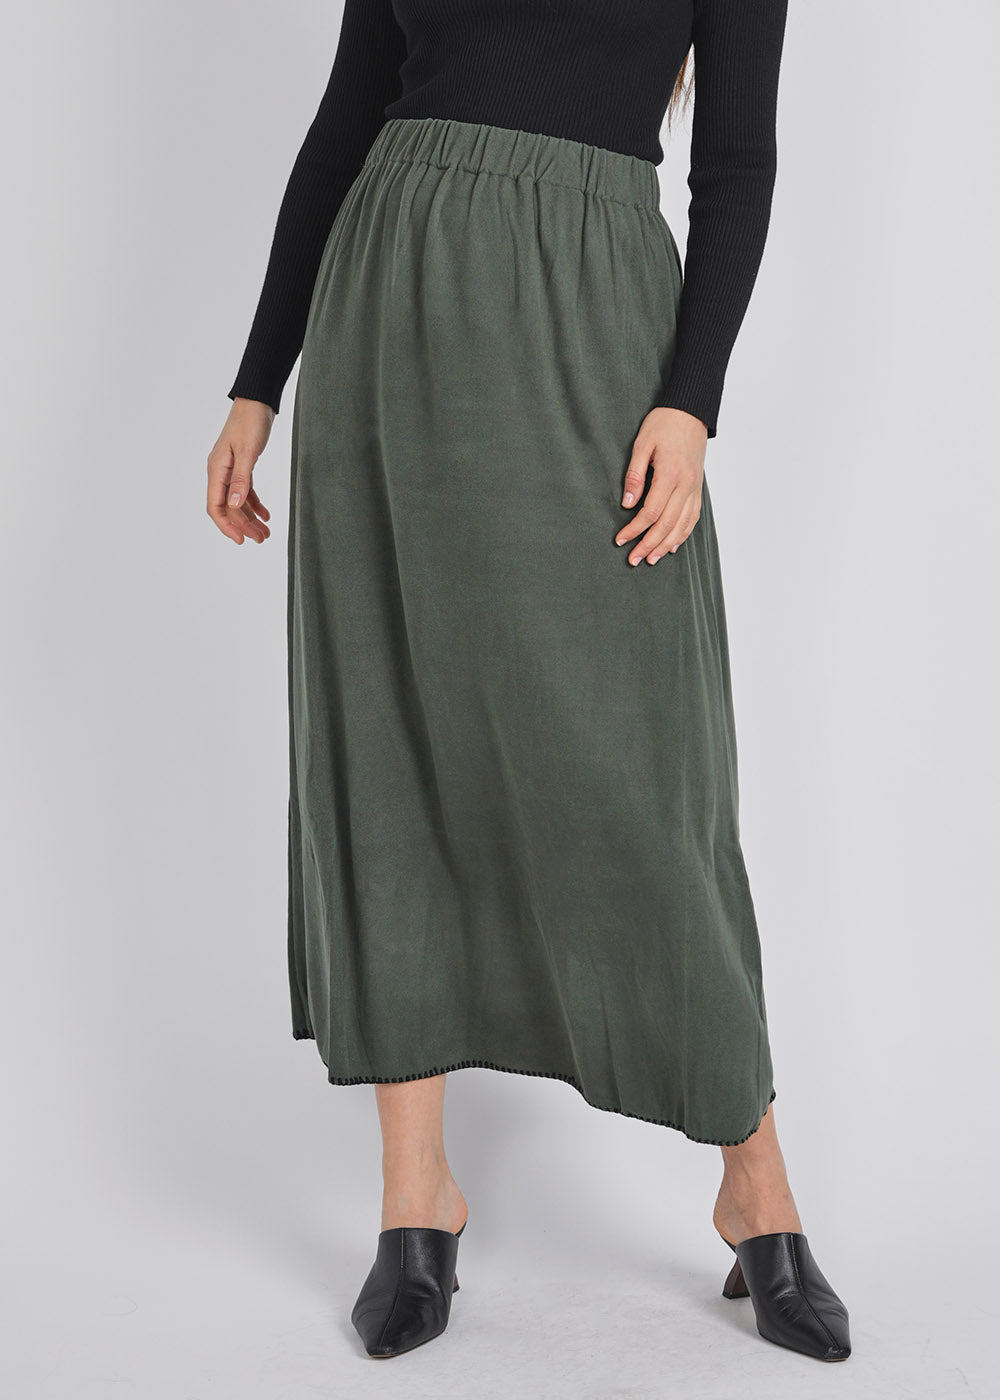 Classic Green Skirt with Black Stitch